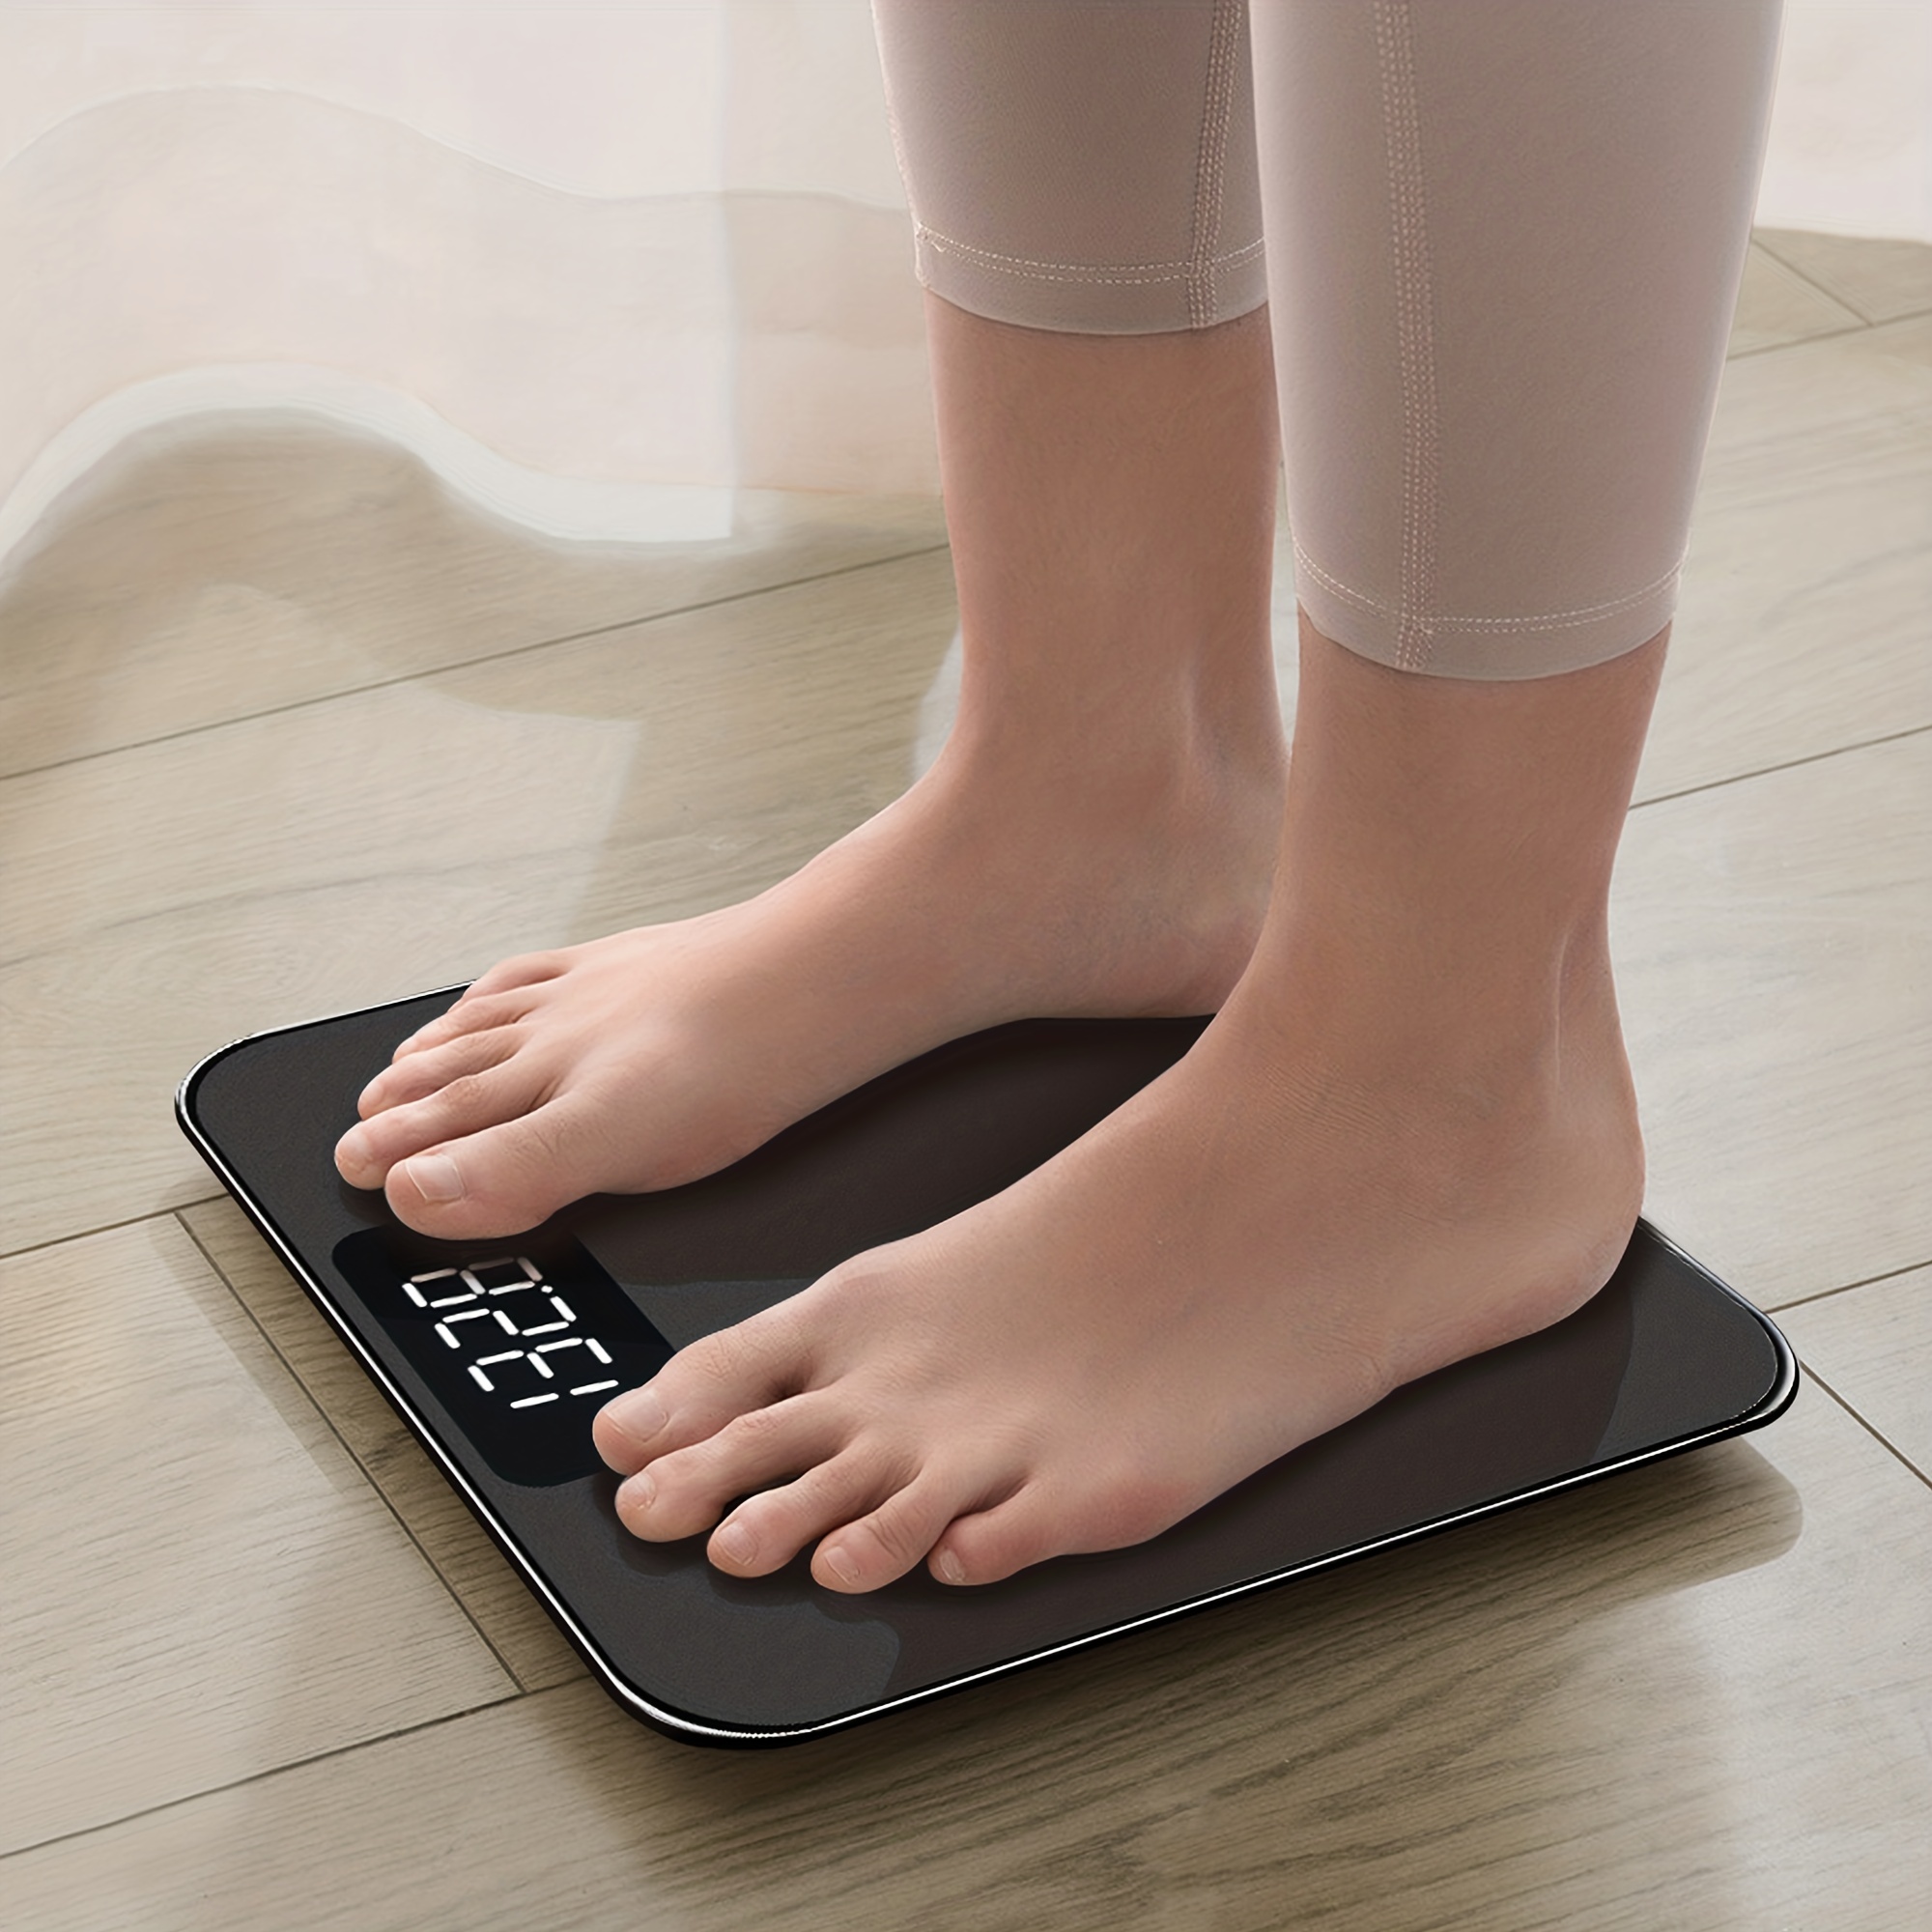 Scale for Body Weight, Bathroom Scale, Digital Scales for Body Weight,  Bathroom Scales for Weight, Weight Scales for People, Body Scale